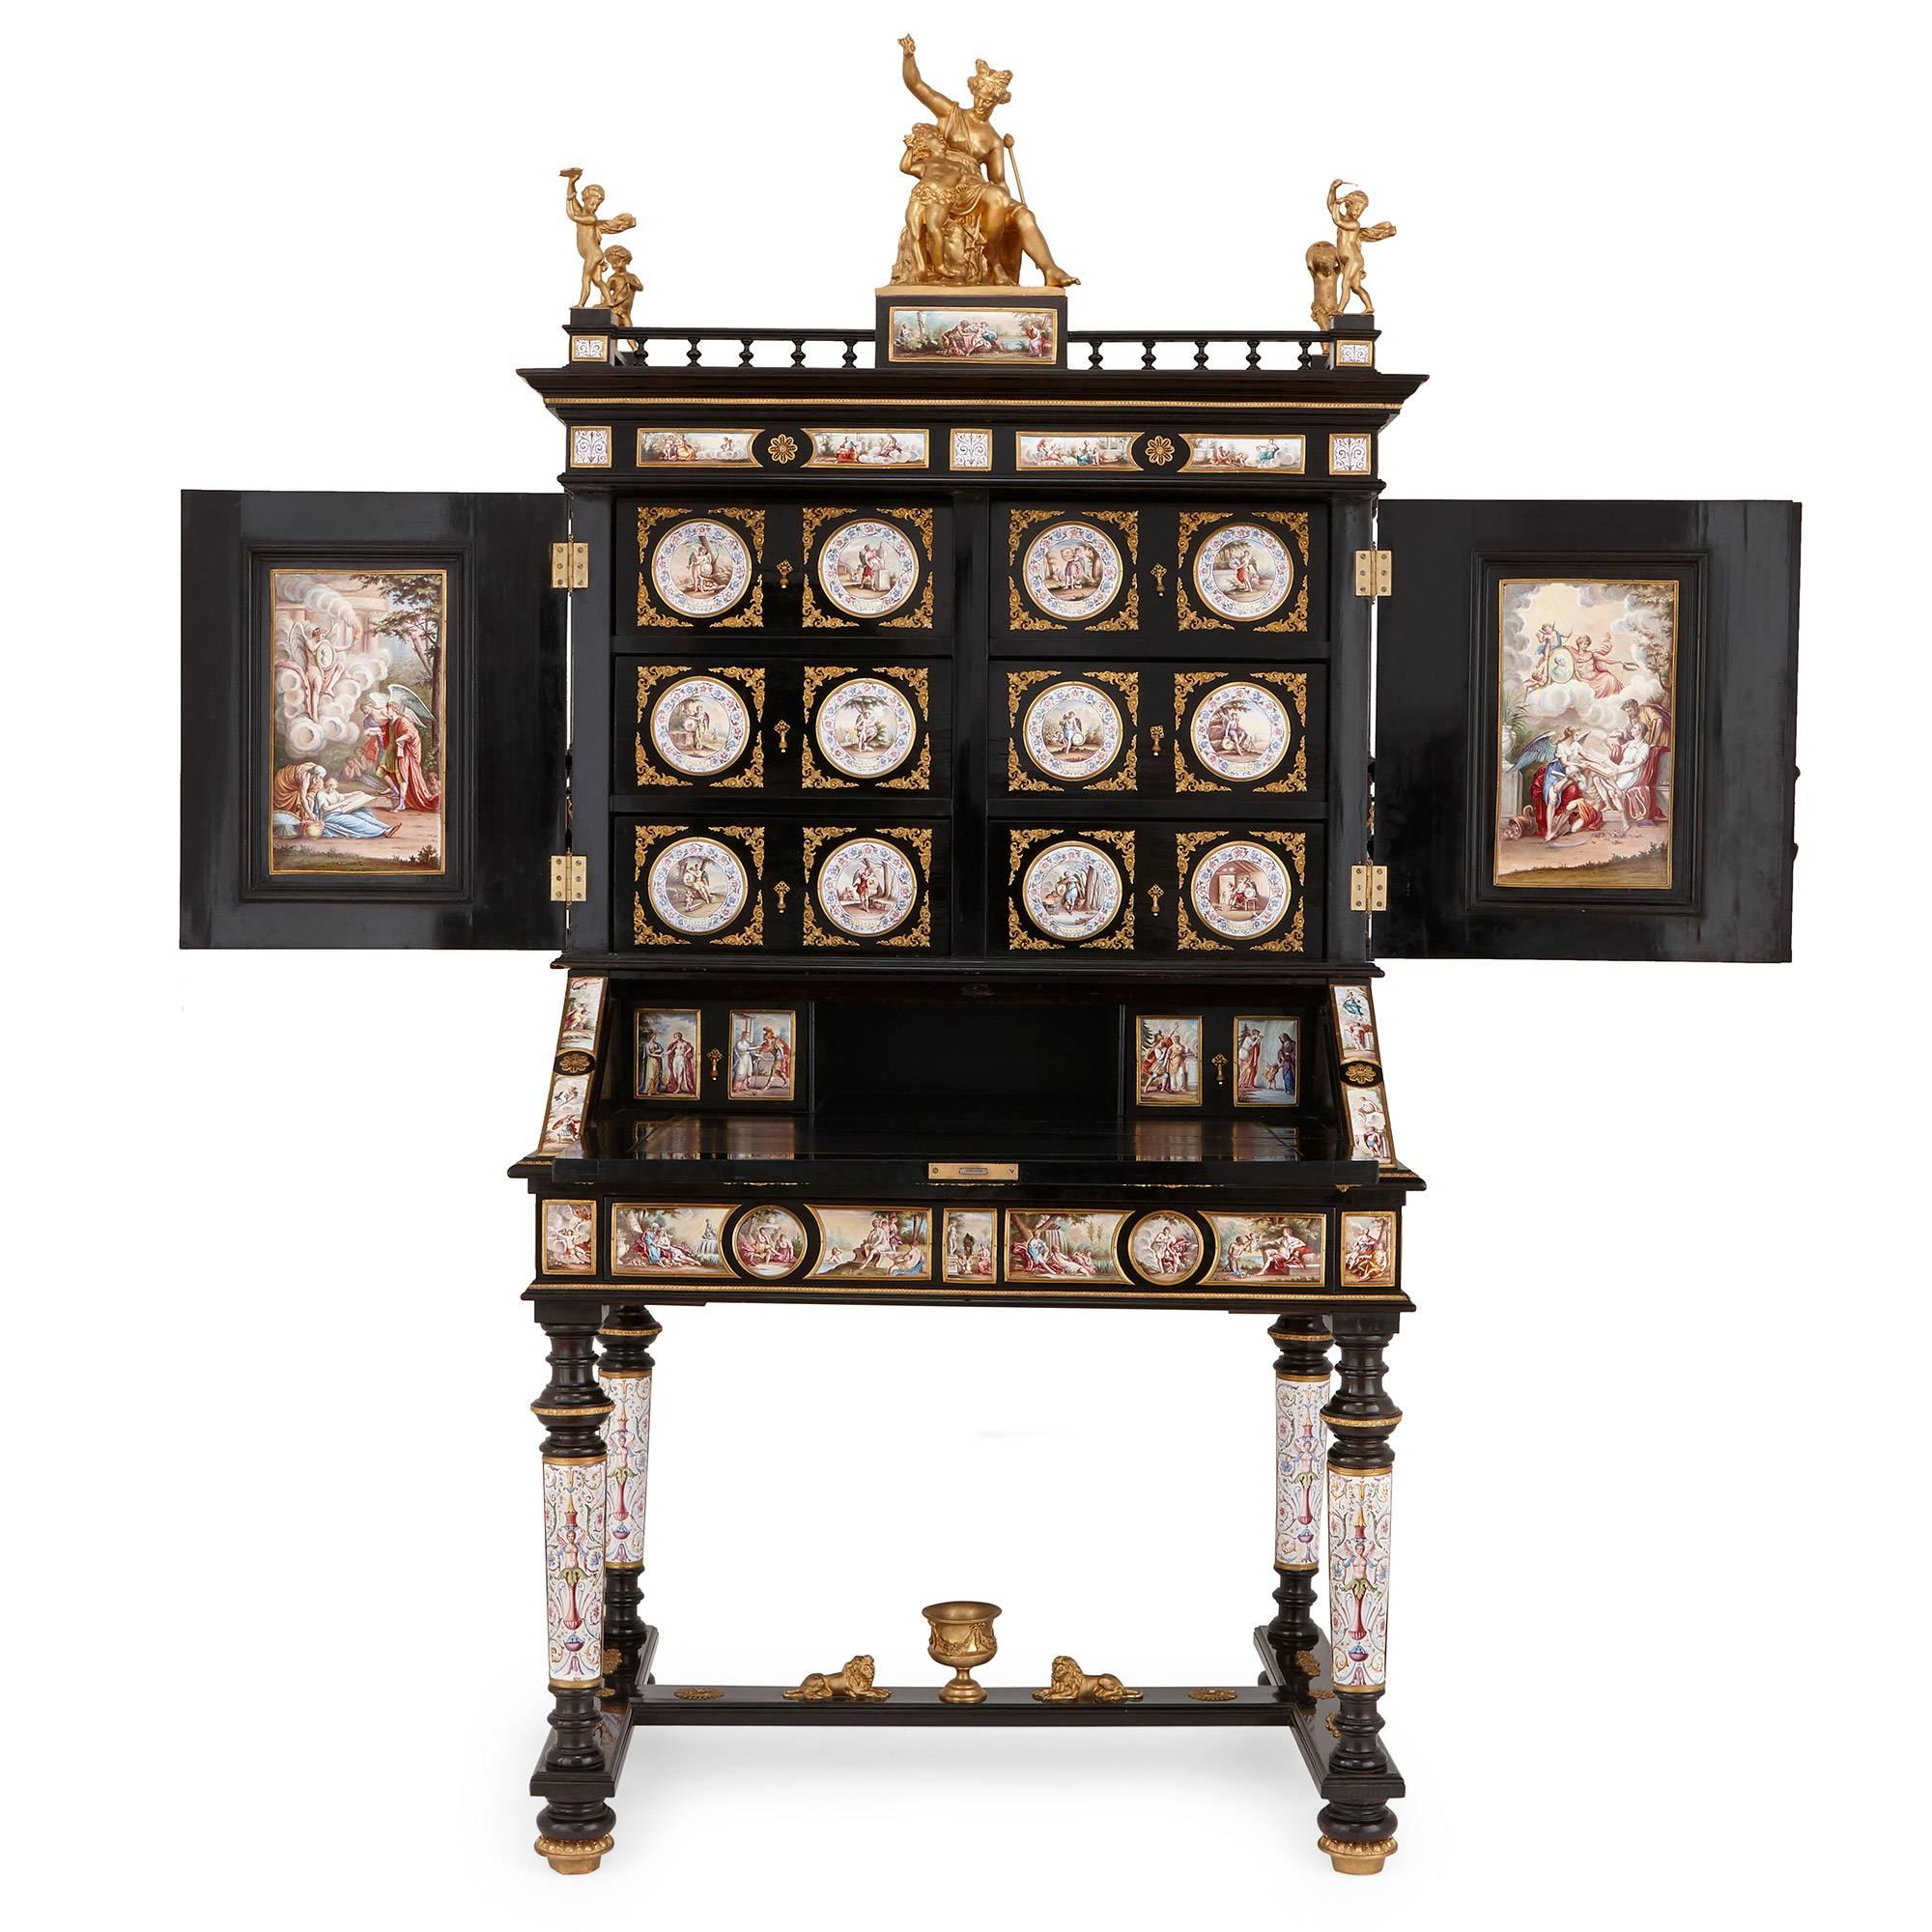 Featuring fine gilt bronze mounts and decorated with intricately detailed Viennese enamel panels of the highest quality, this antique bonheur du jour is truly a masterpiece. The desk stands at over two meters tall, and consists of a rectangular